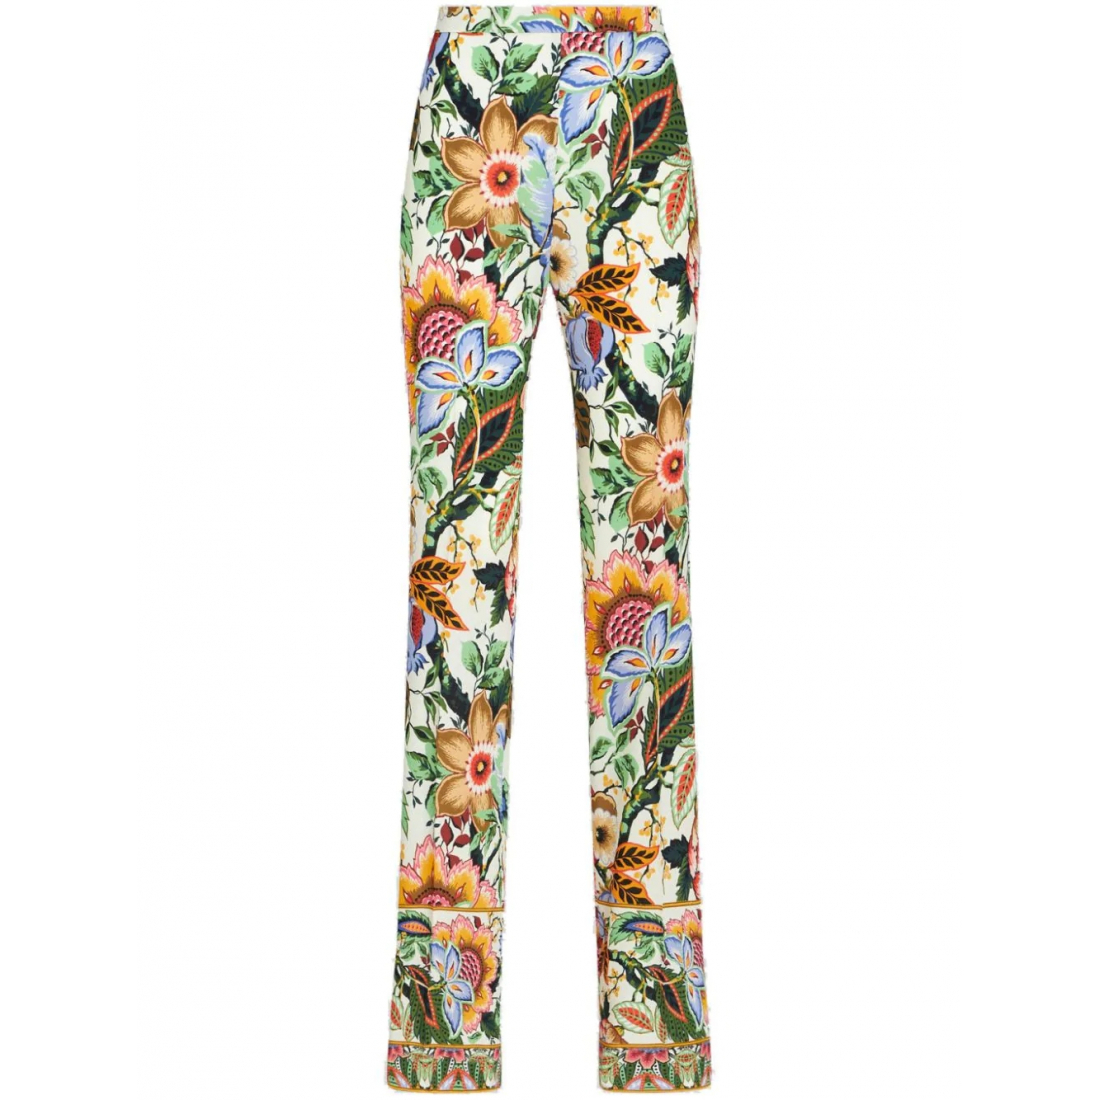 Women's 'Floral' Trousers